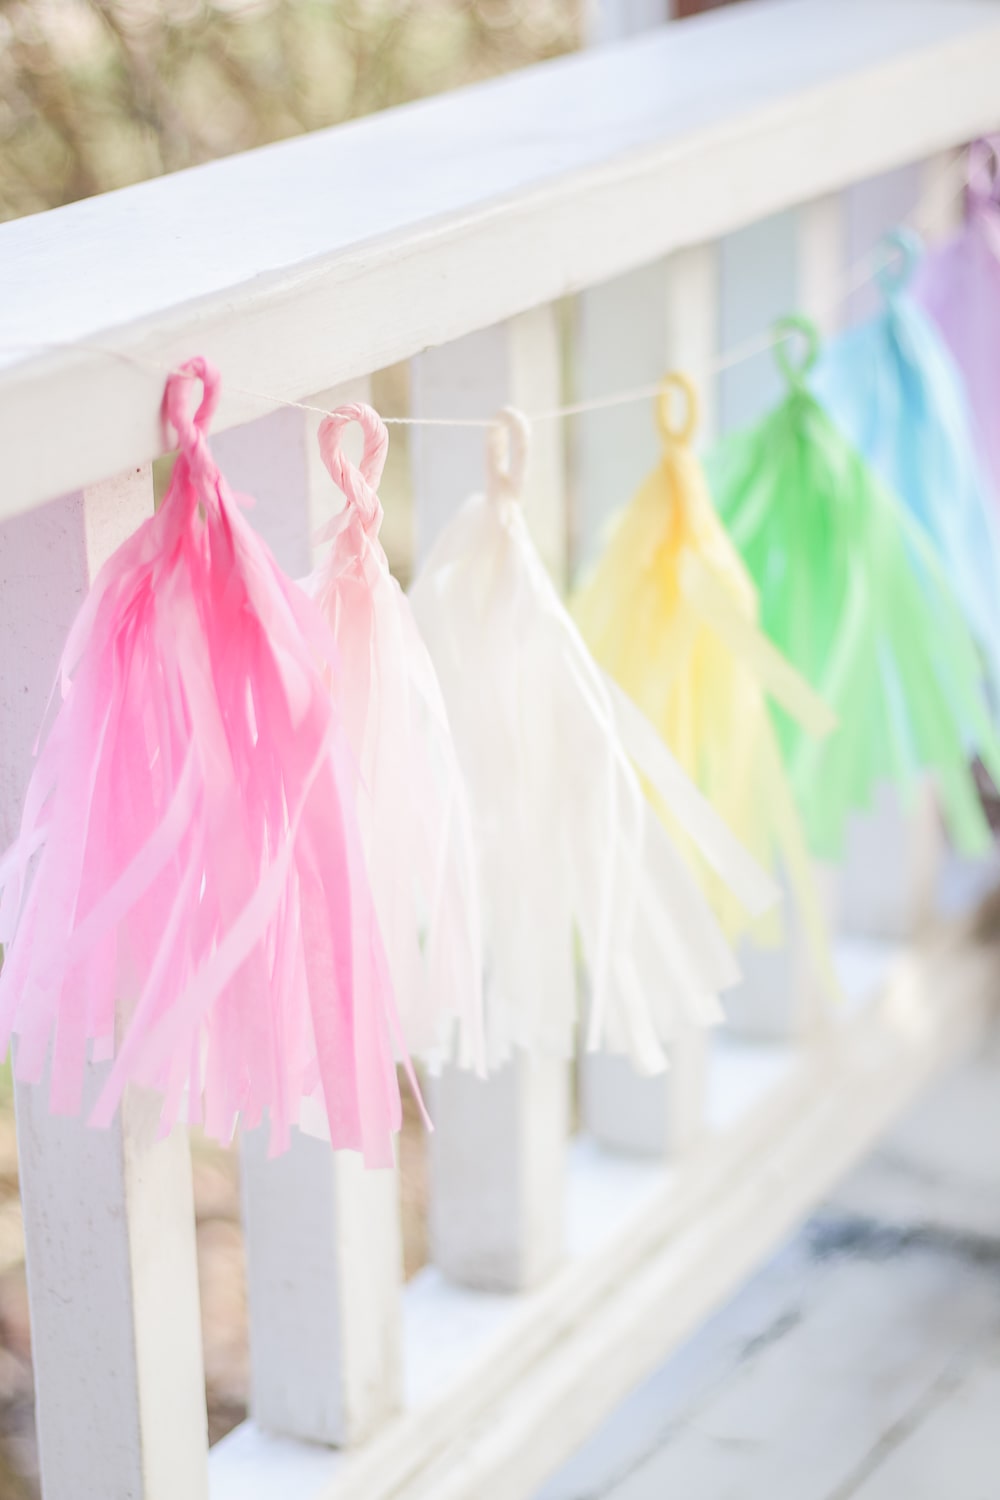 DIY blogger Stephanie Ziajka of Diary of a Debutante shows how she made her own pastel tissue tassel garland for spring